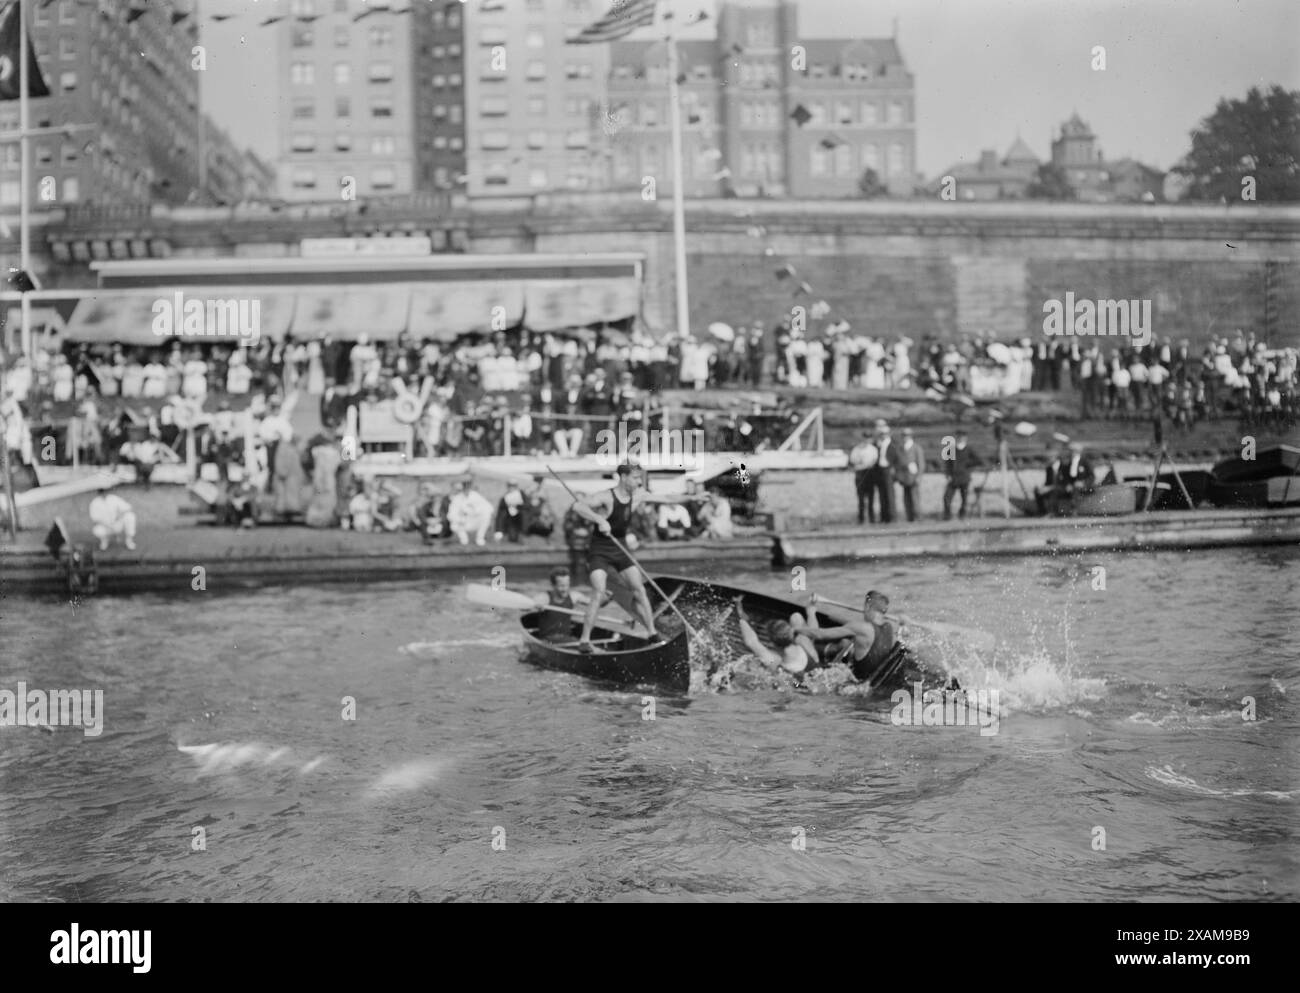 Canoe Tilting, between c1910 and c1915. Shows activities at the Colonial Yacht Club,which was located on the small beach just below Riverside Drive on the Hudson River, roughly between 140th and 142nd Streets in Harlem. Today, the Henry Hudson Parkway and North River Wastewater Treatment Plant are located in this area. Stock Photo